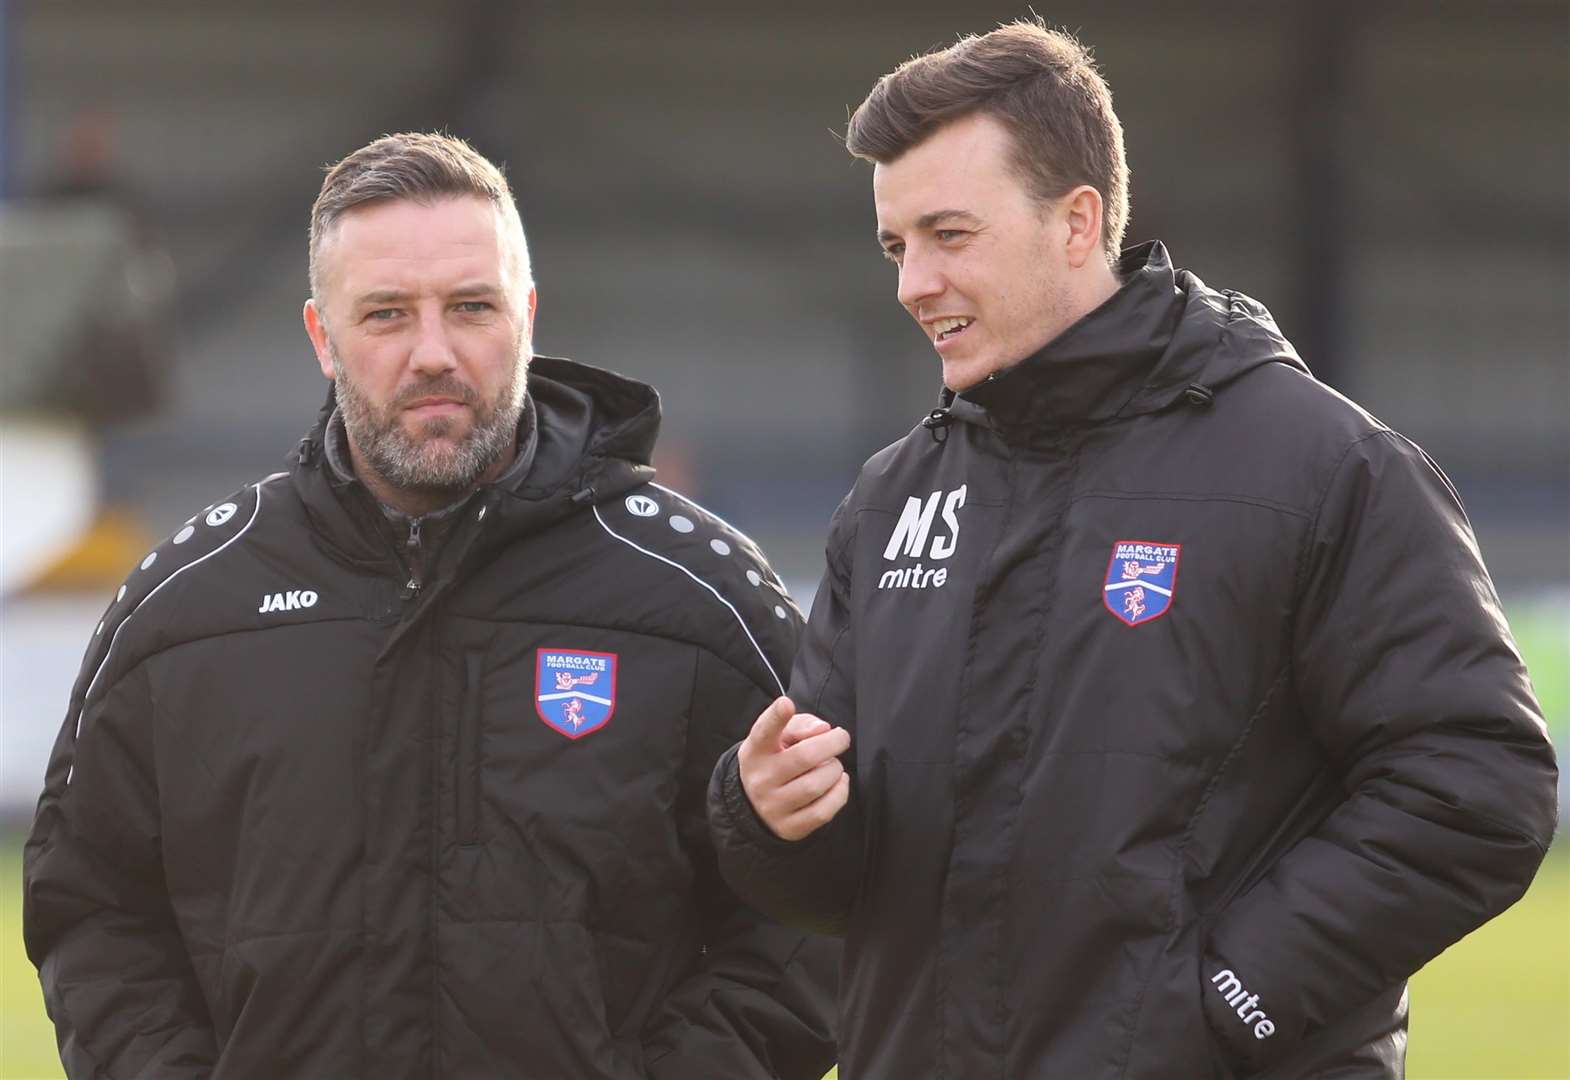 New Margate boss Jay Saunders, left, alongside Mike Sandmann, who remains as part of the coaching team. Picture: Don Walker